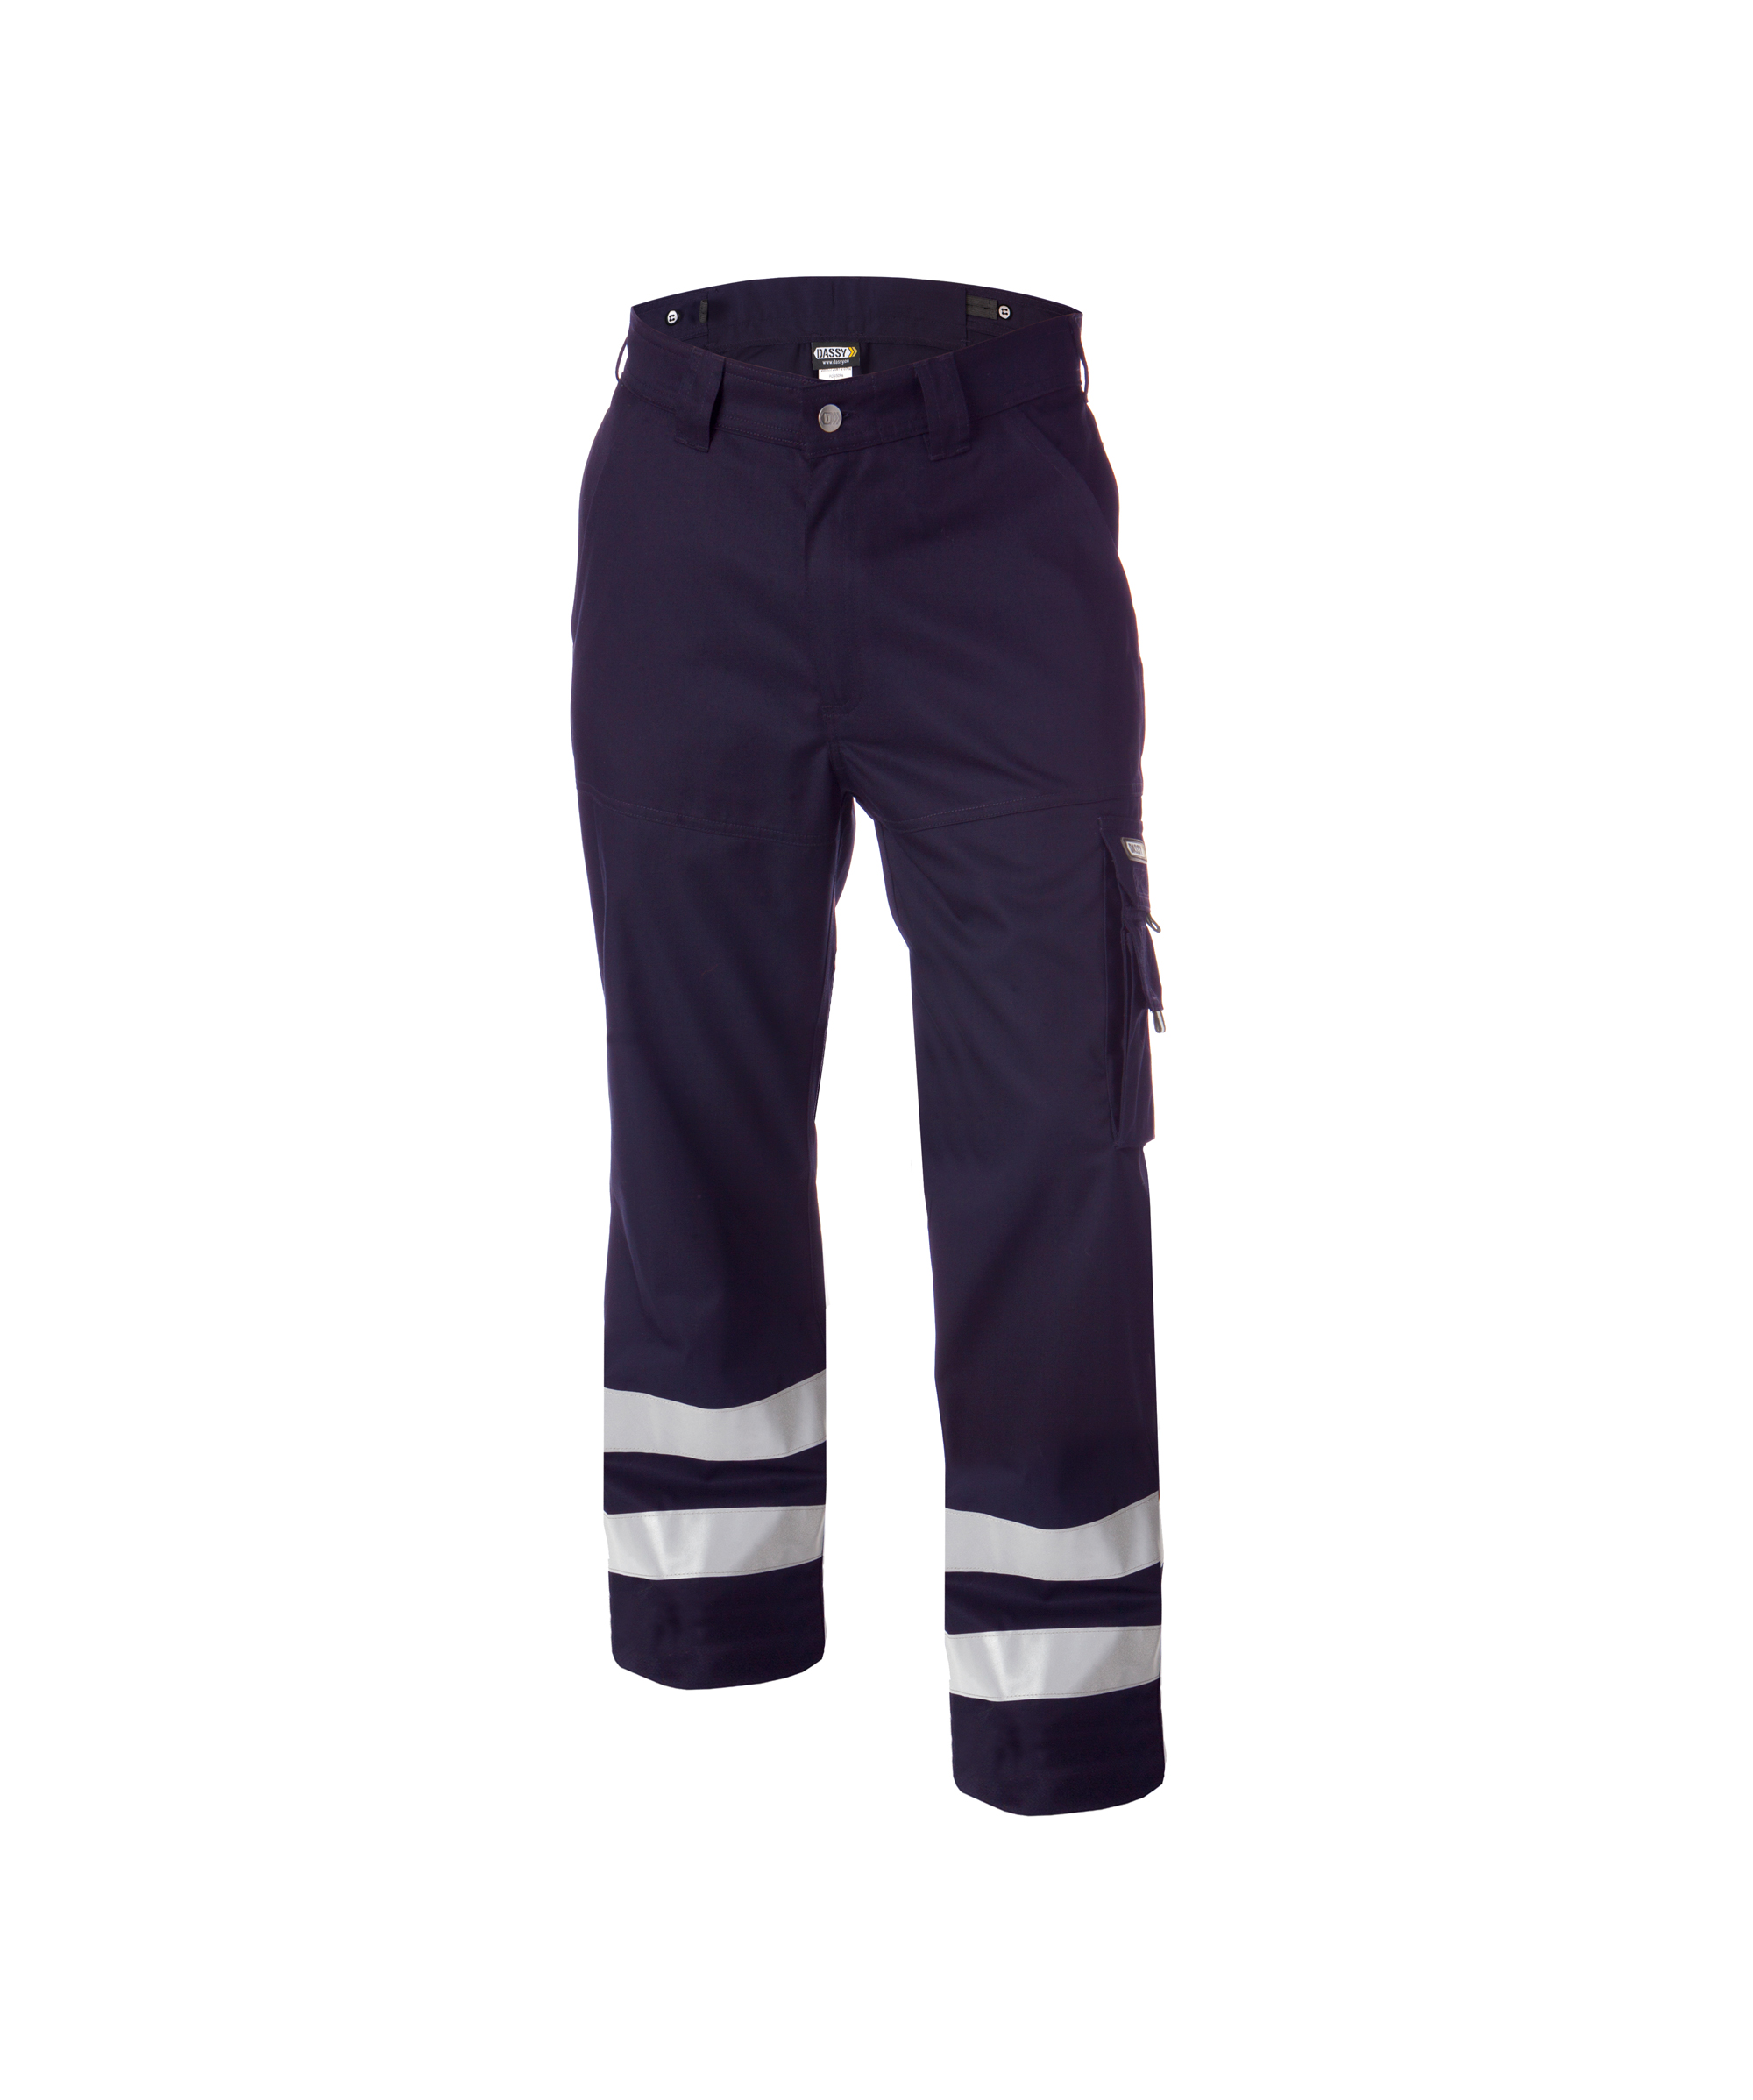 vegas_work-trousers-with-reflective-tape_navy_front.jpg